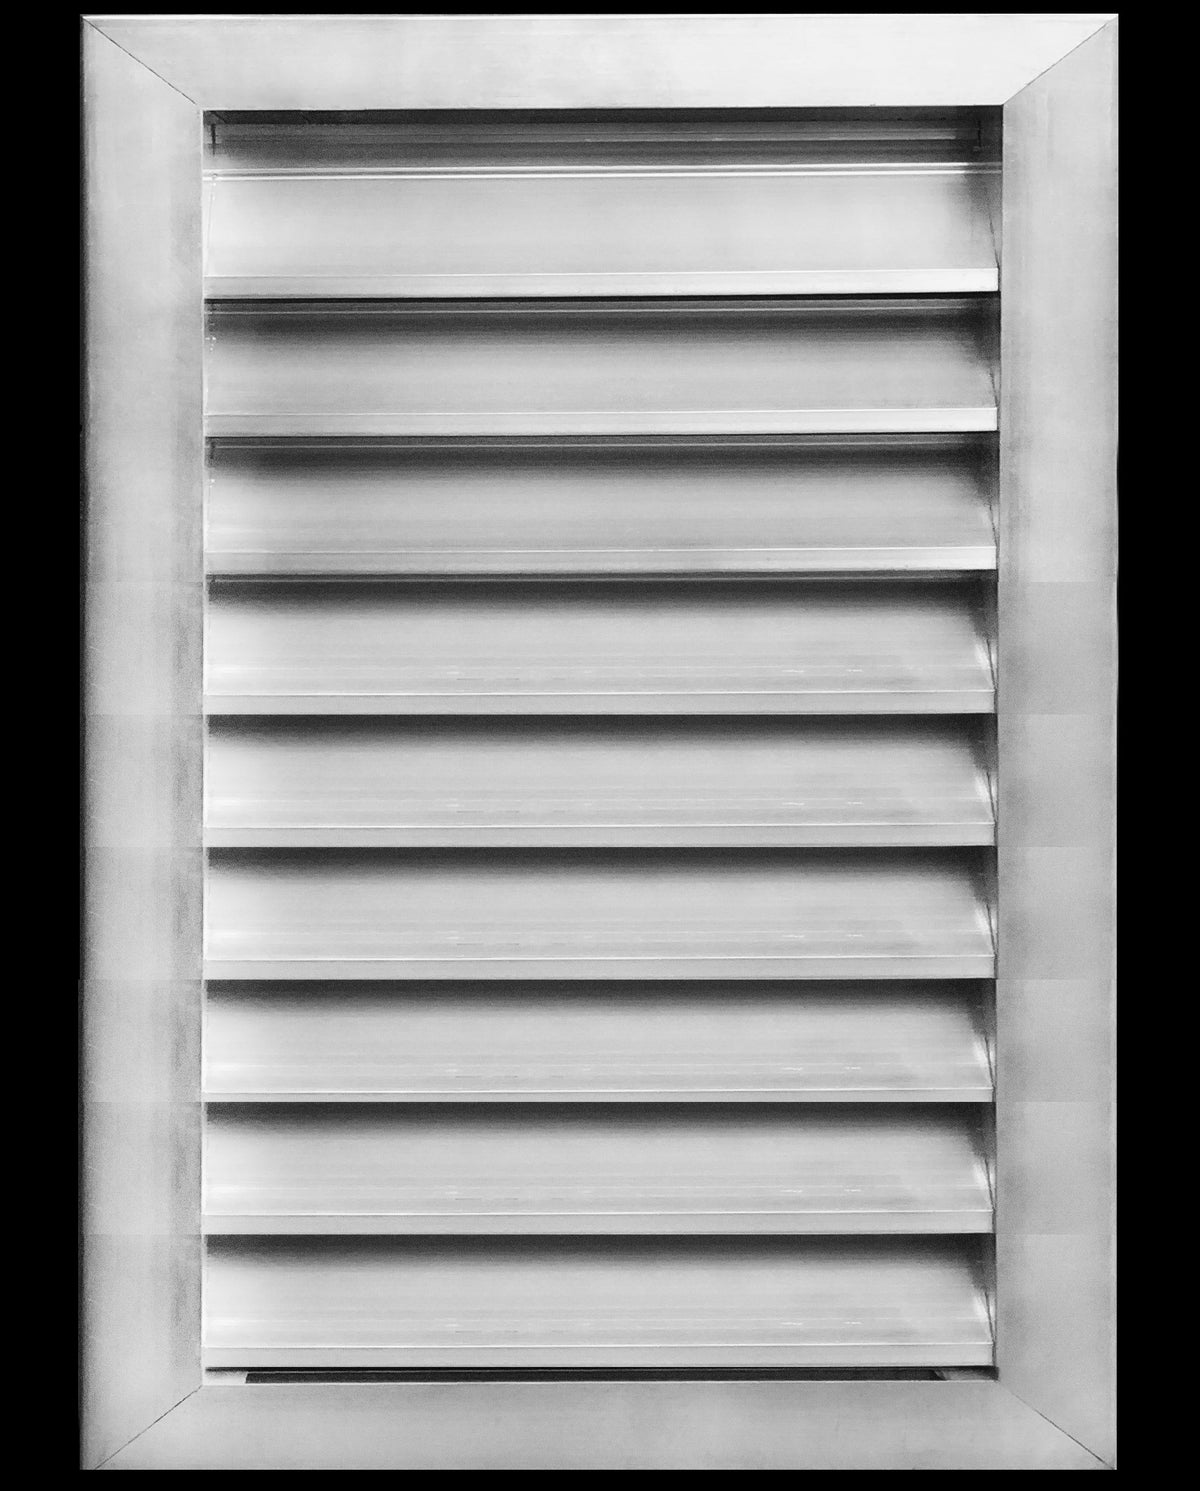 14&quot;w X 20&quot;h Aluminum Outdoor Weather Proof Louvers - Rain &amp; Waterproof Air Vent With Screen Mesh